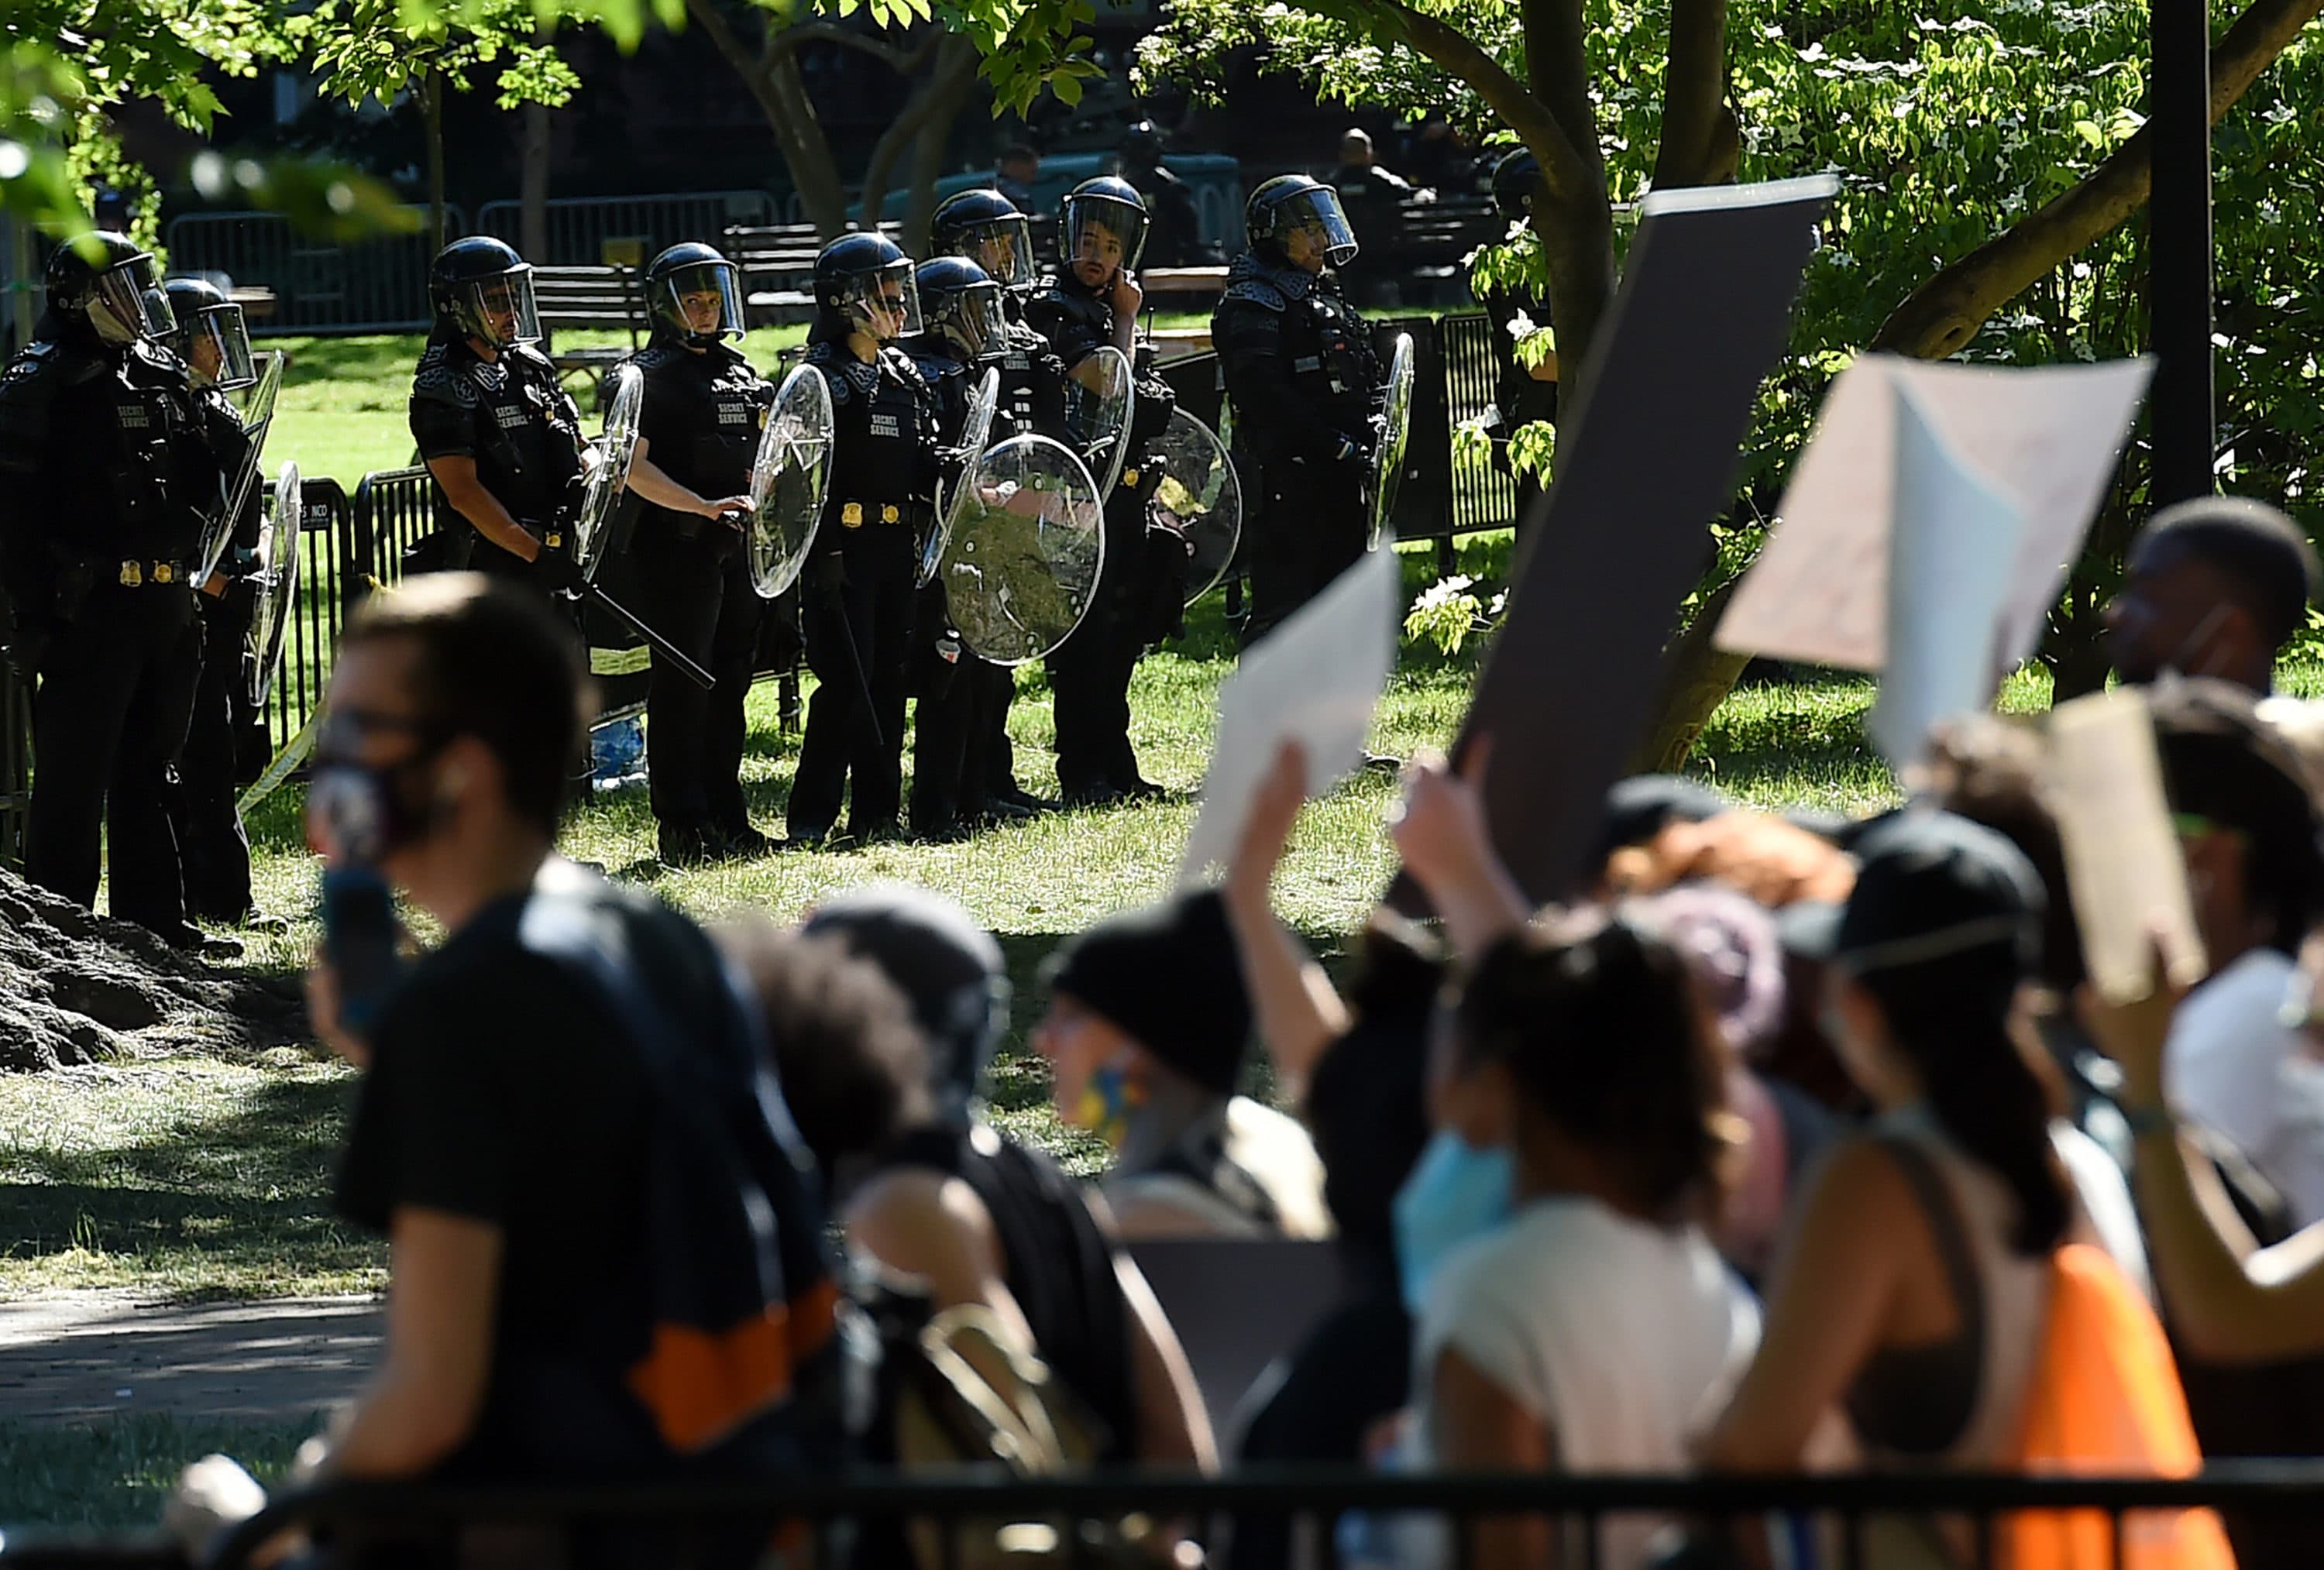 U.S. Park Police stand watch inside Lafayette Square near the White House in Washington, DC on June 1, 2020 as demonstrators protest the death of George Floyd. Police fired tear gas outside the White House as anti-racism protesters again took to the streets to voice fury at police brutality. (OLIVIER DOULIERY/AFP via Getty Images)